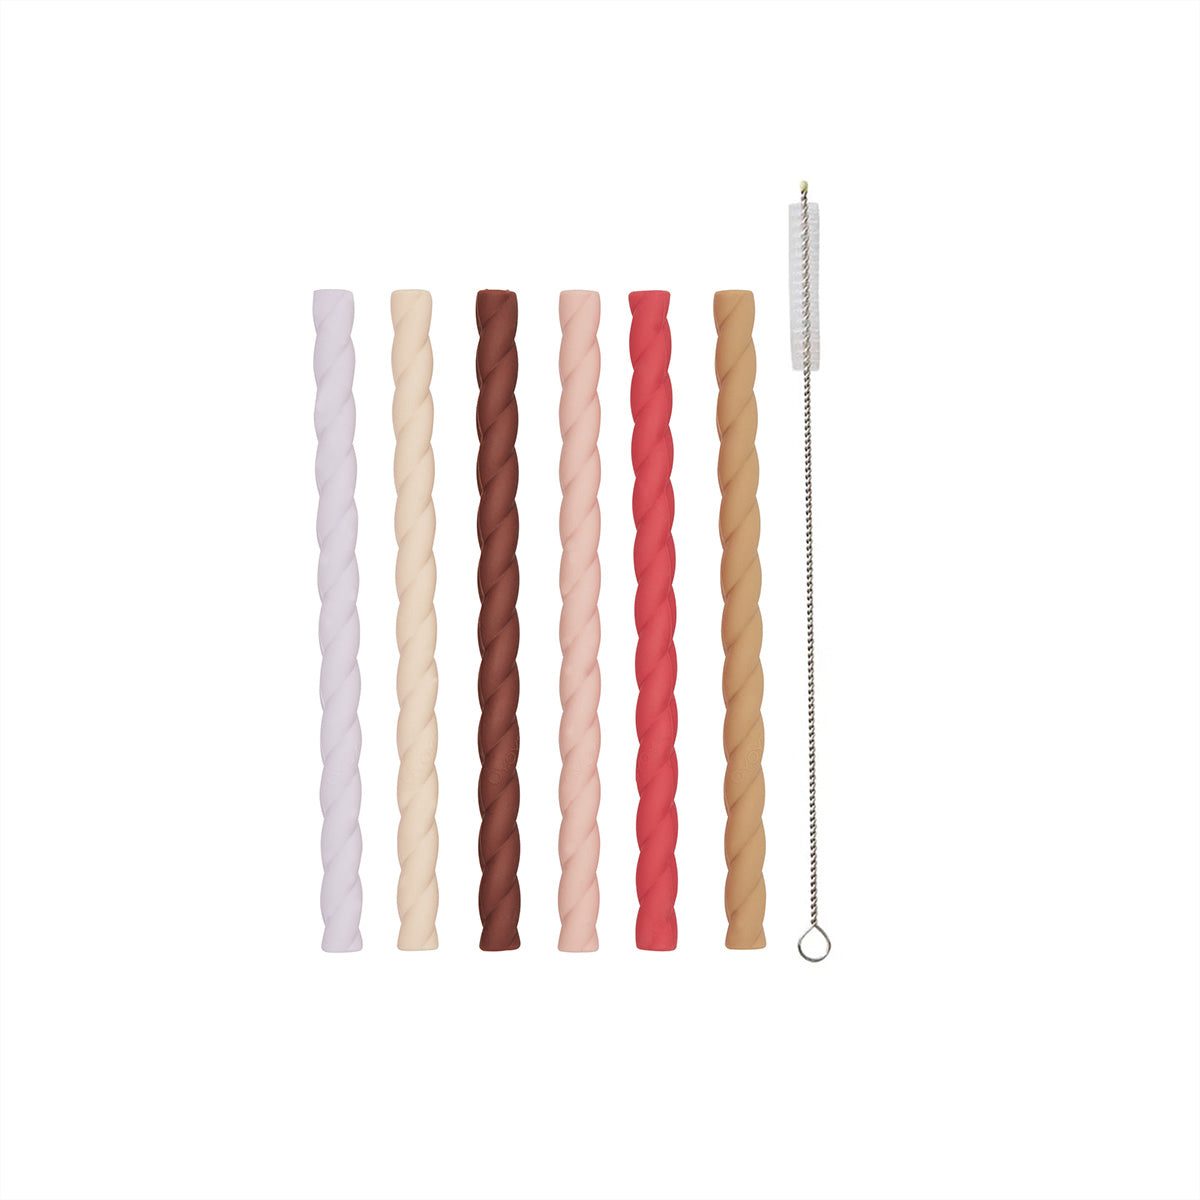 OYOY MINI Mellow Silicone Straw - Pack of 6 Straws 405 Cherry Red / Vanilla